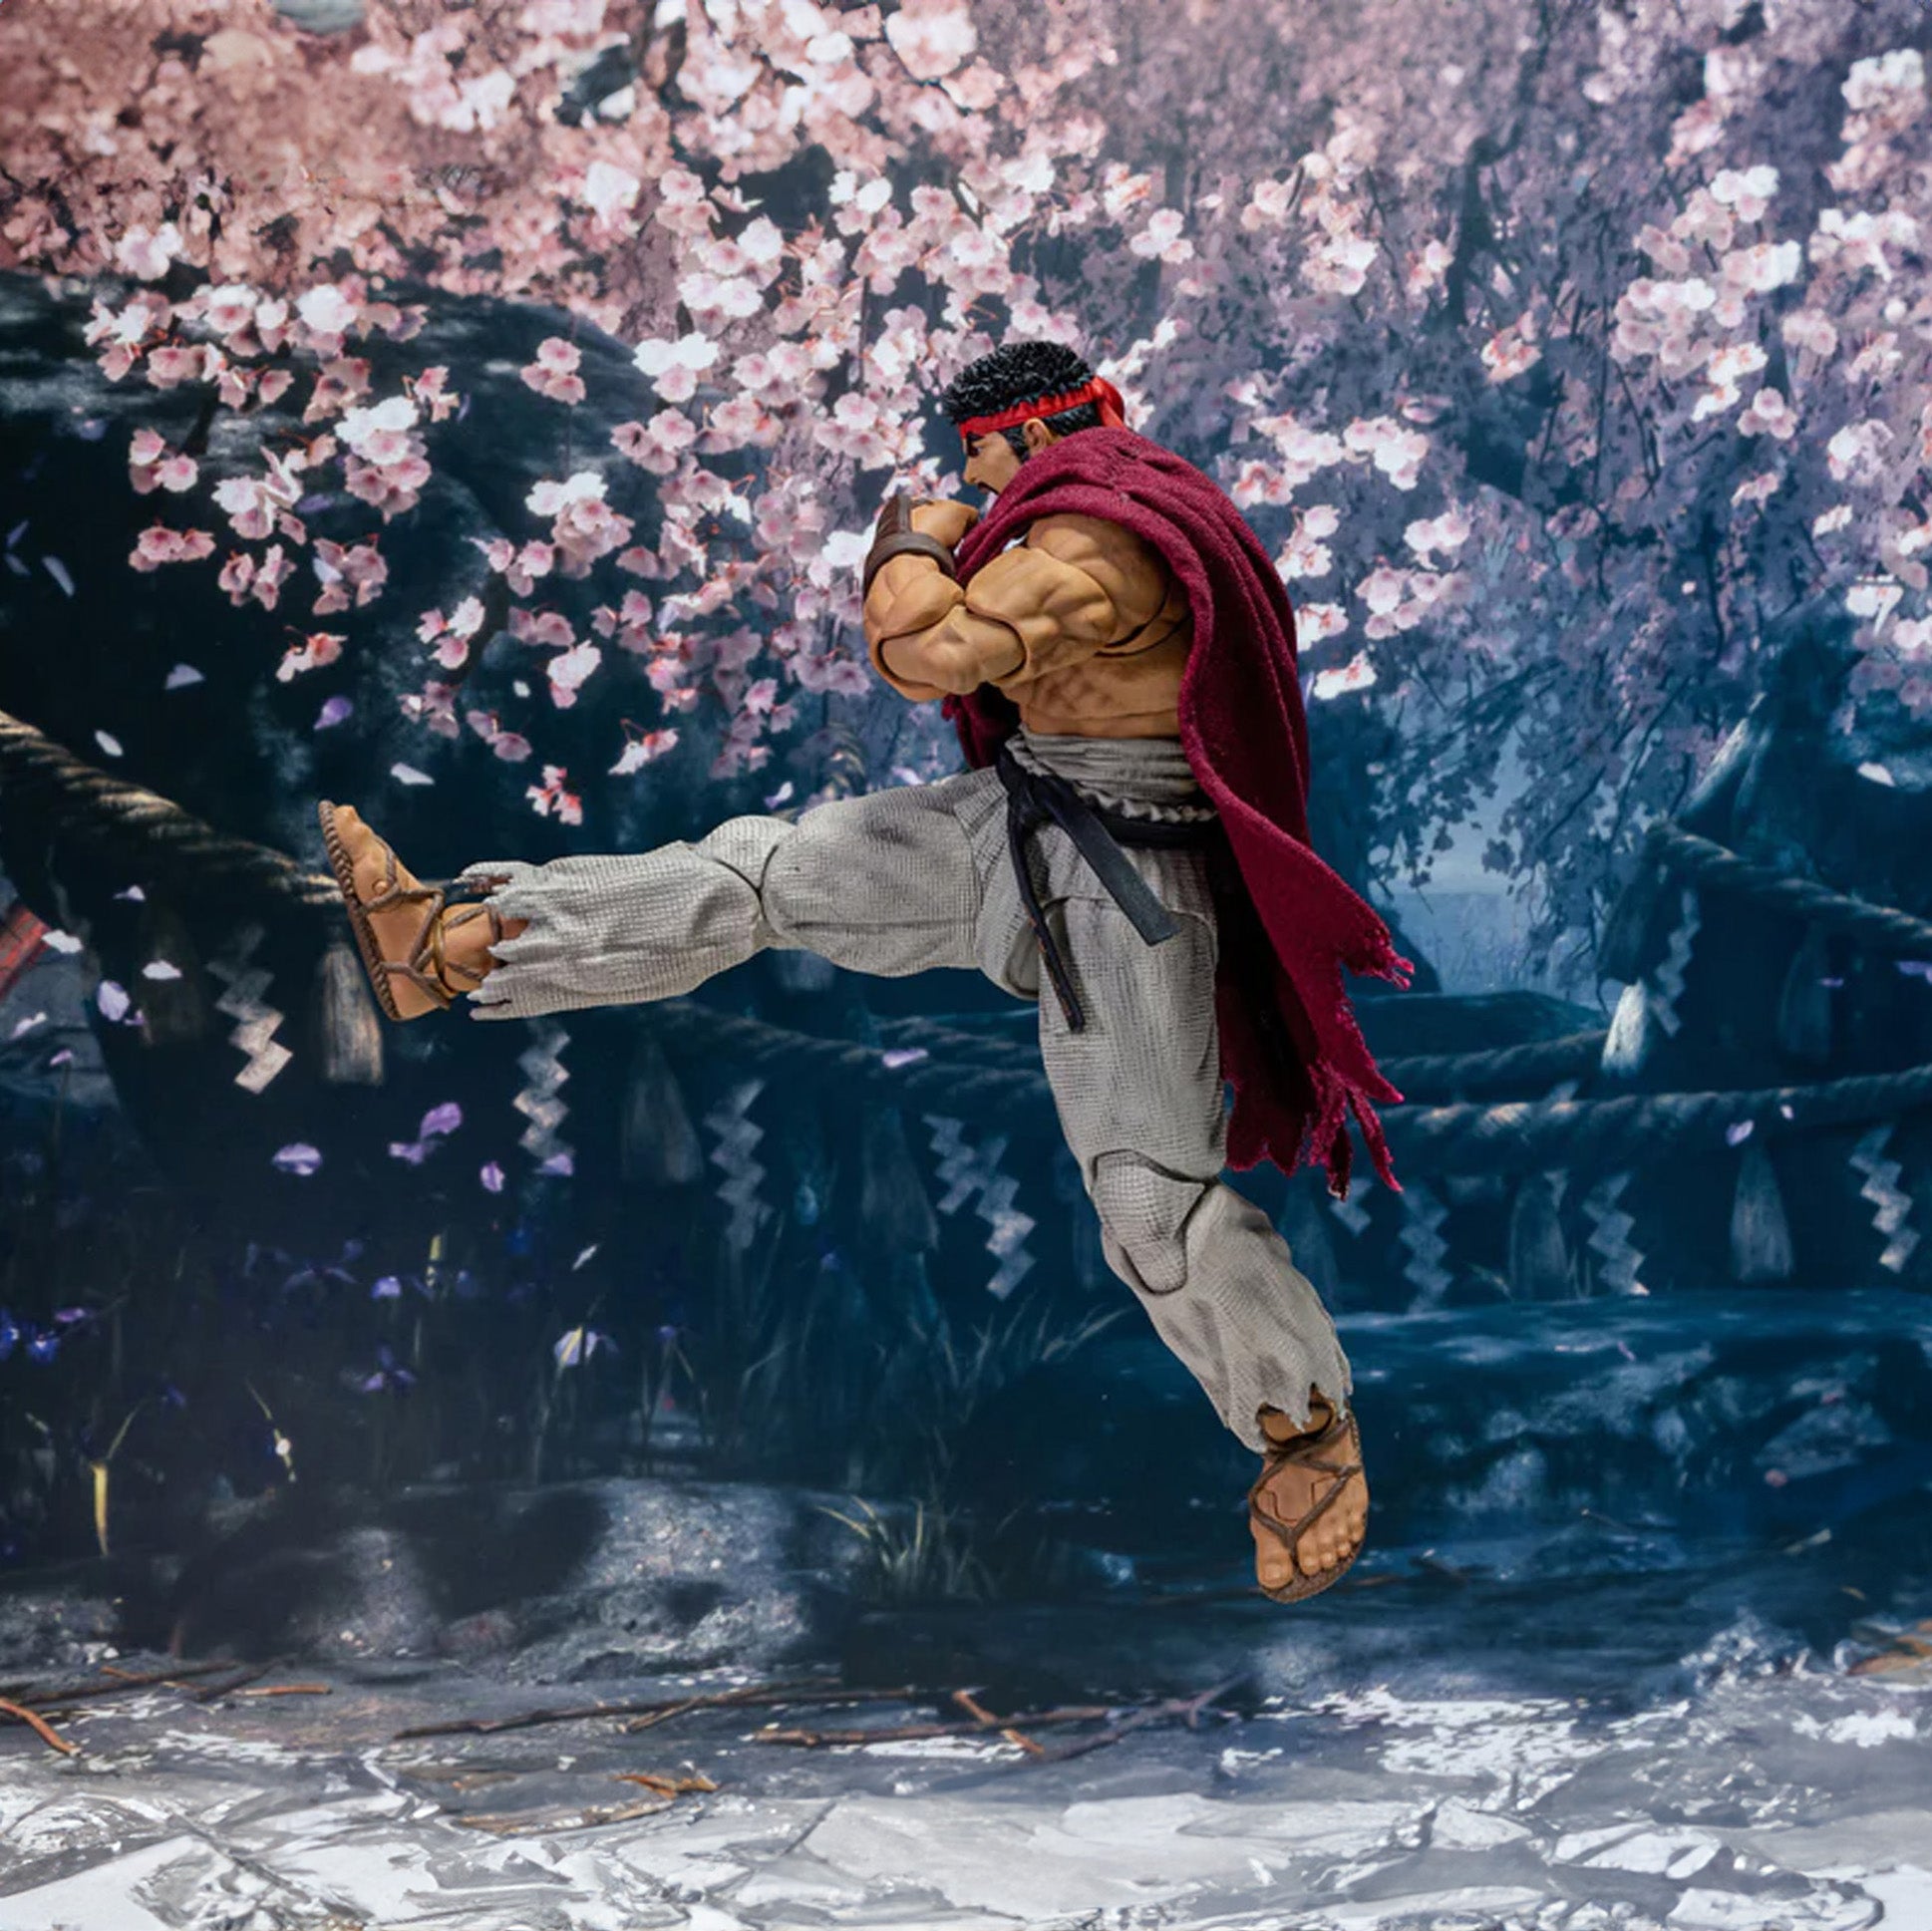 Storm Collectibles - Street Fighter 6 - Ryu (1/12 Scale) - Marvelous Toys